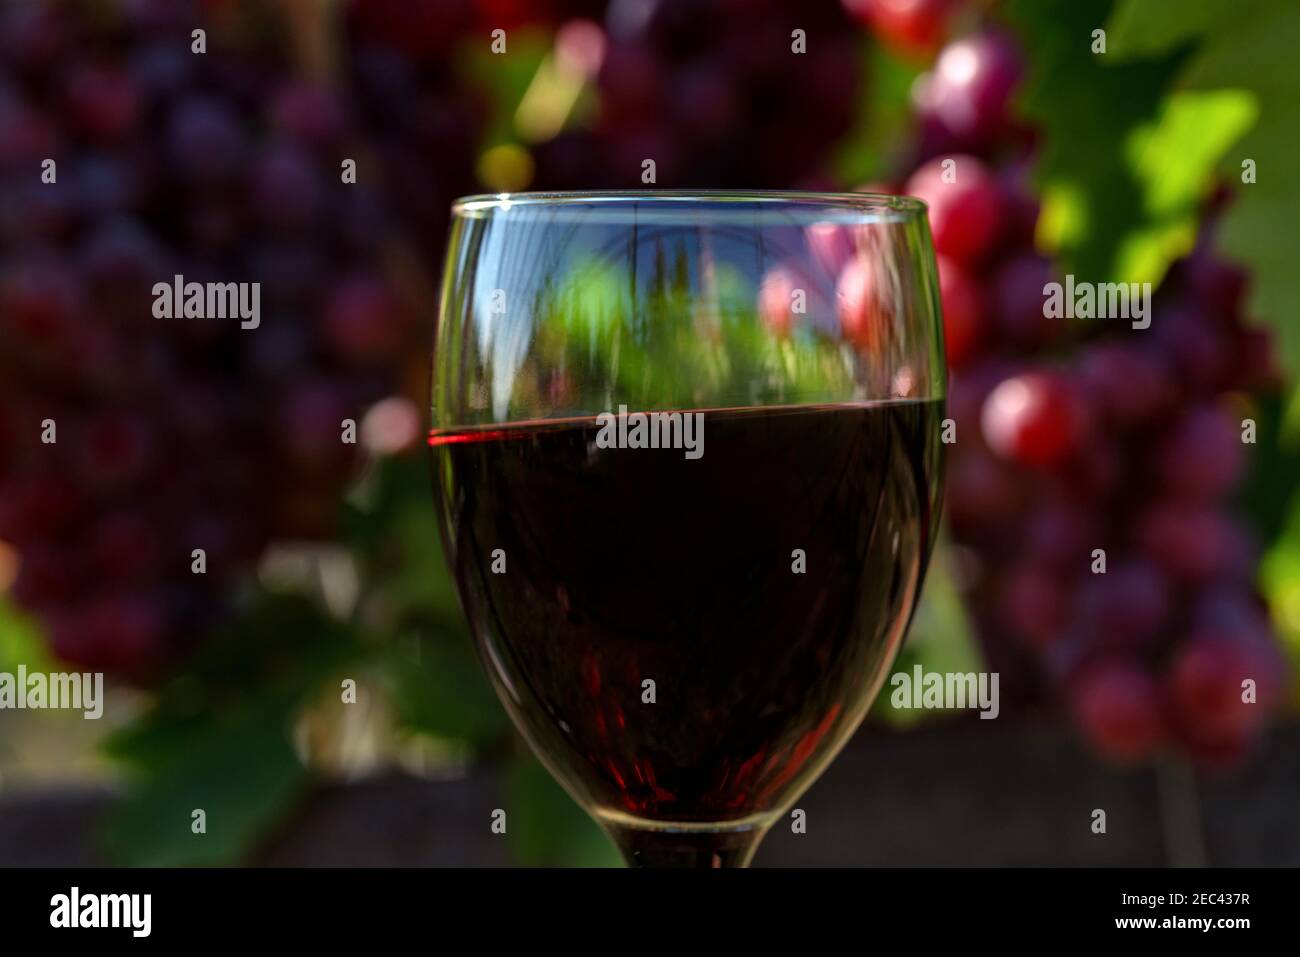 Wine production concept - glass of redwine next to ripe grapes on vine. Stock Photo